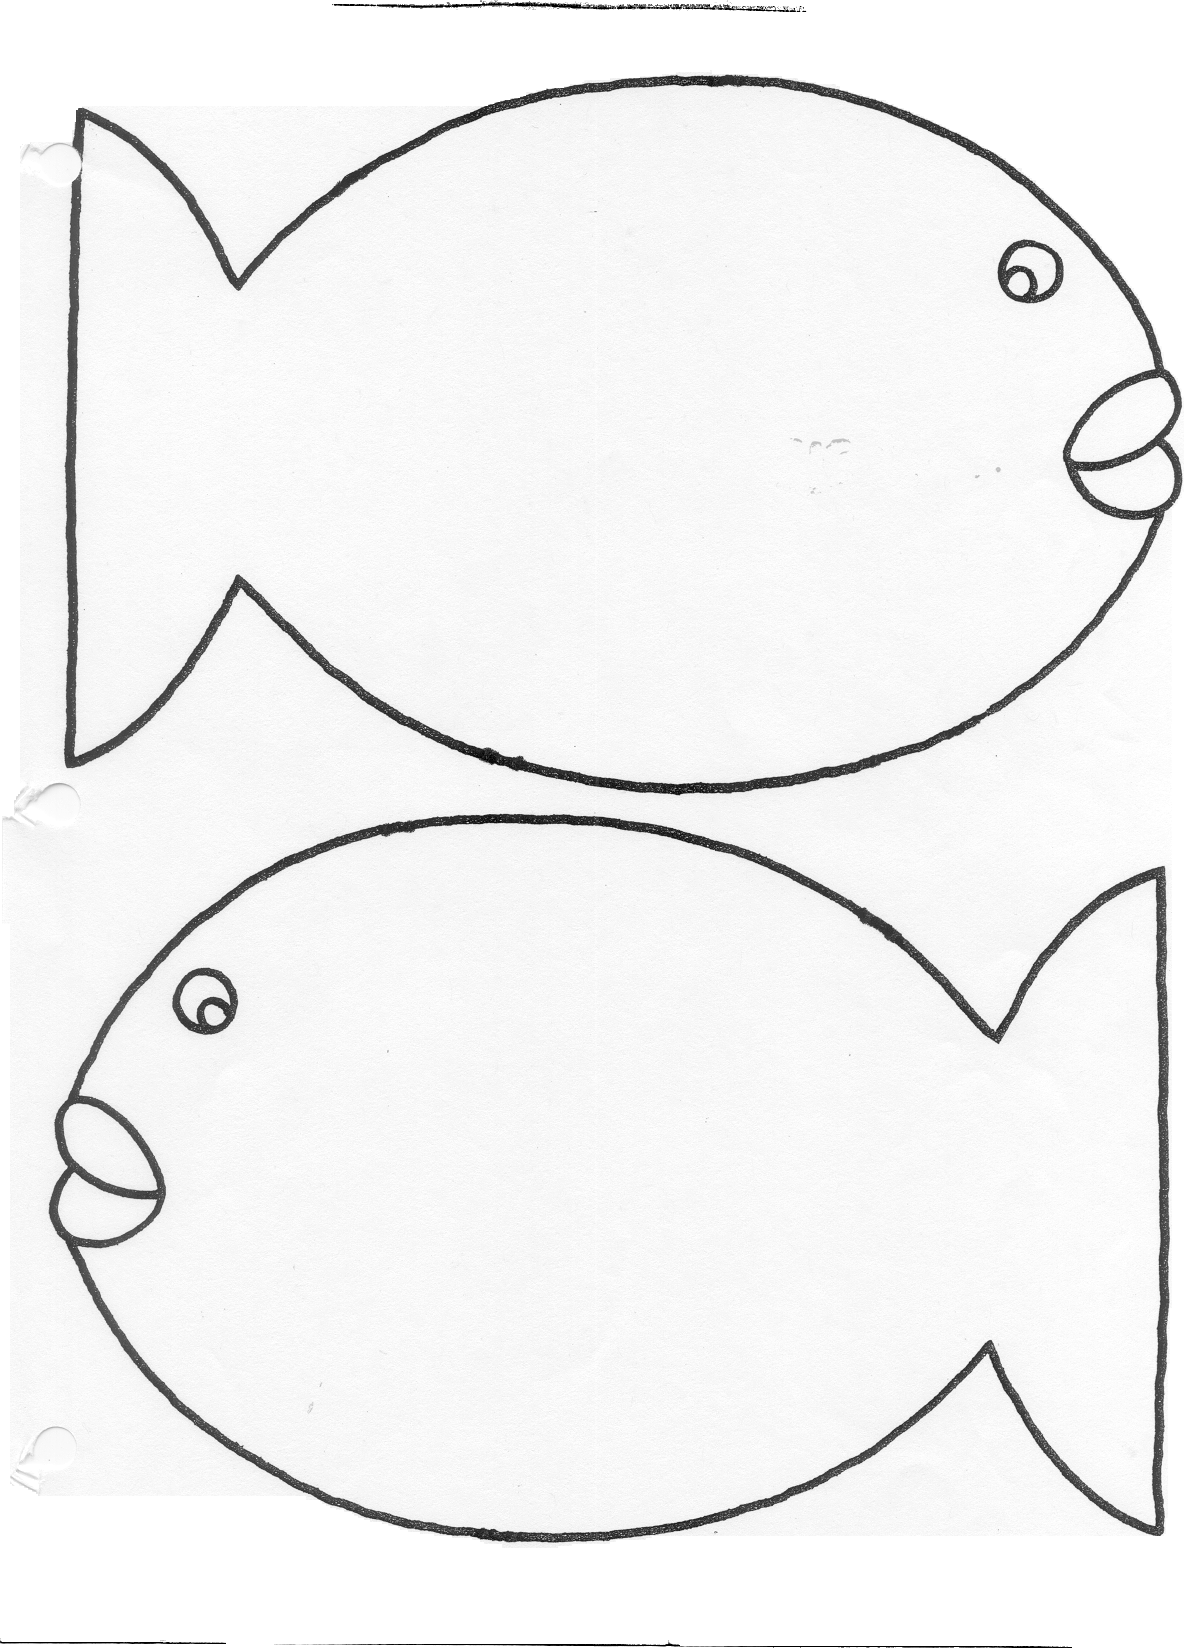 Blank Fish Templates - ClipArt Best